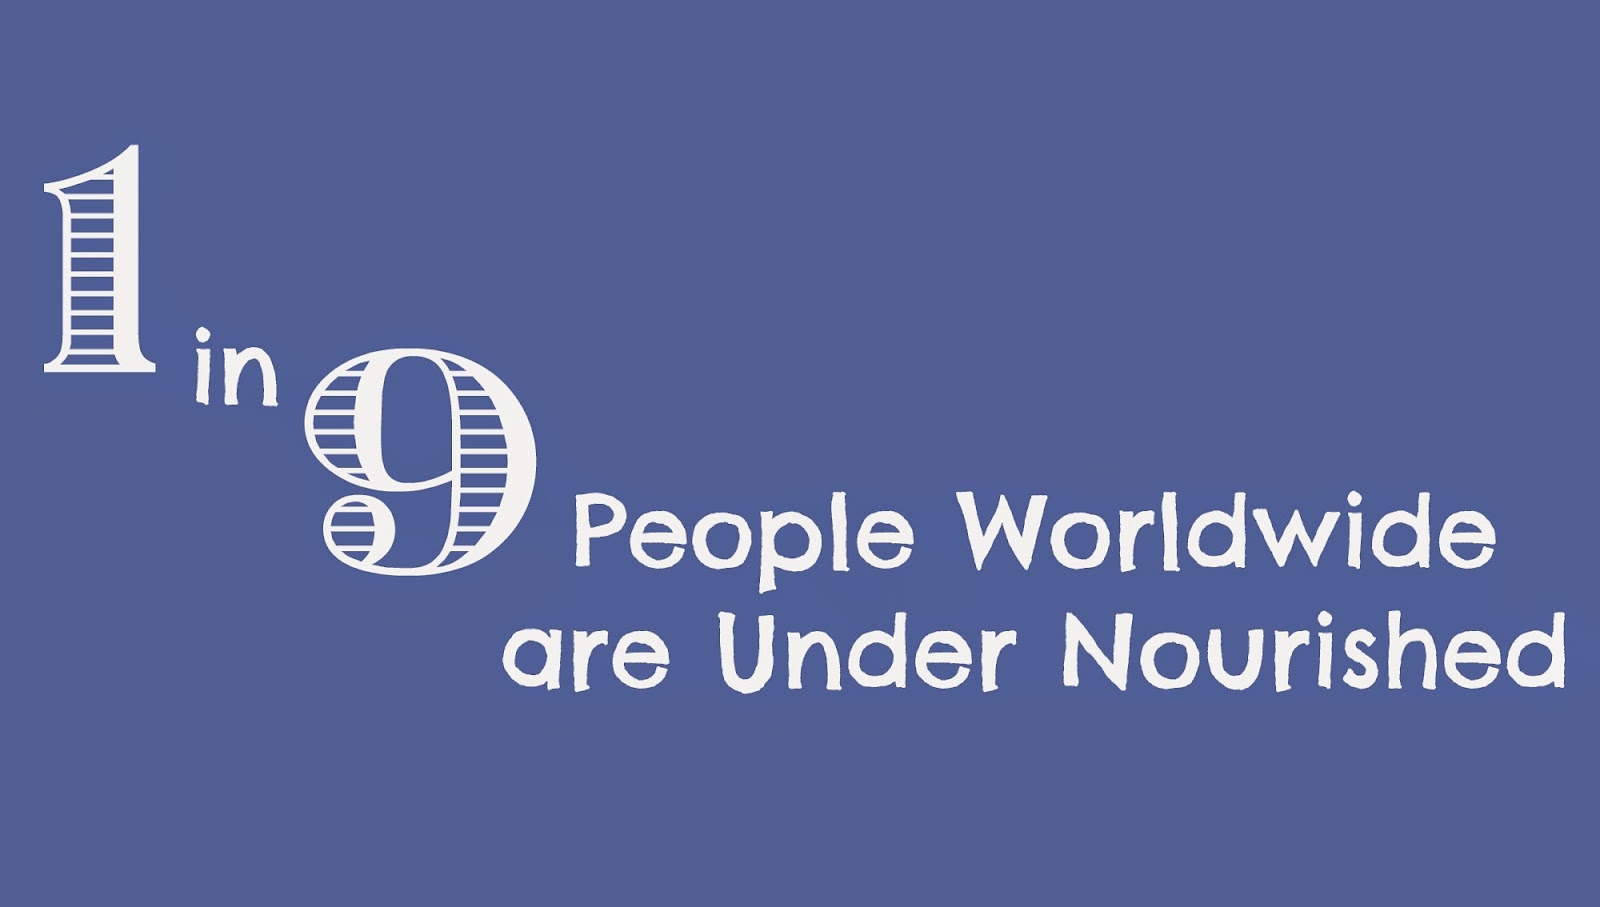 1 in 9 people worldwide are under nourished #WFD2014